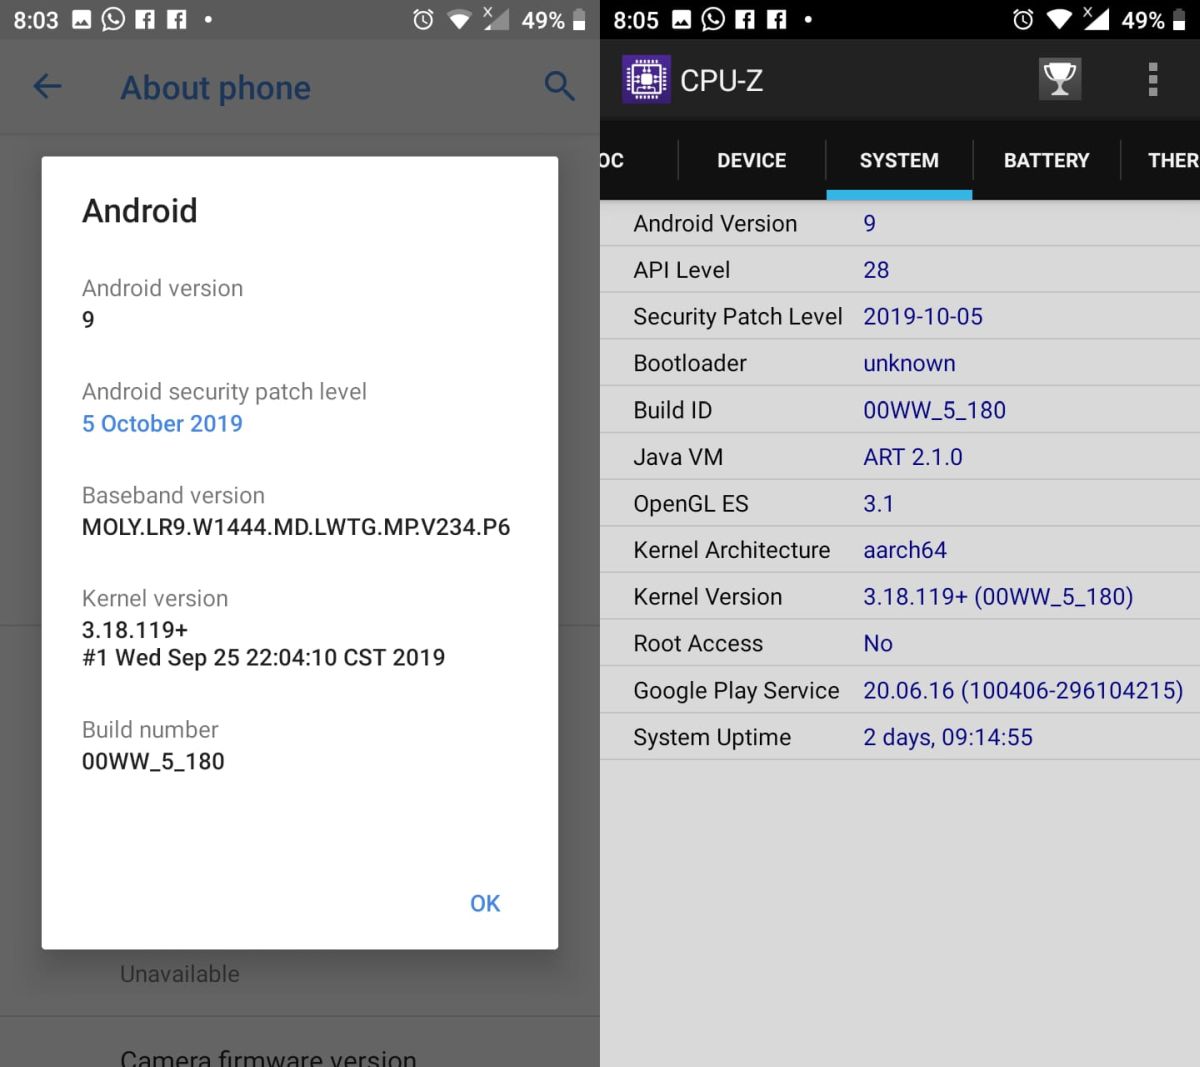 How To Check If An Android Device Is 64-Bit Or 32-Bit